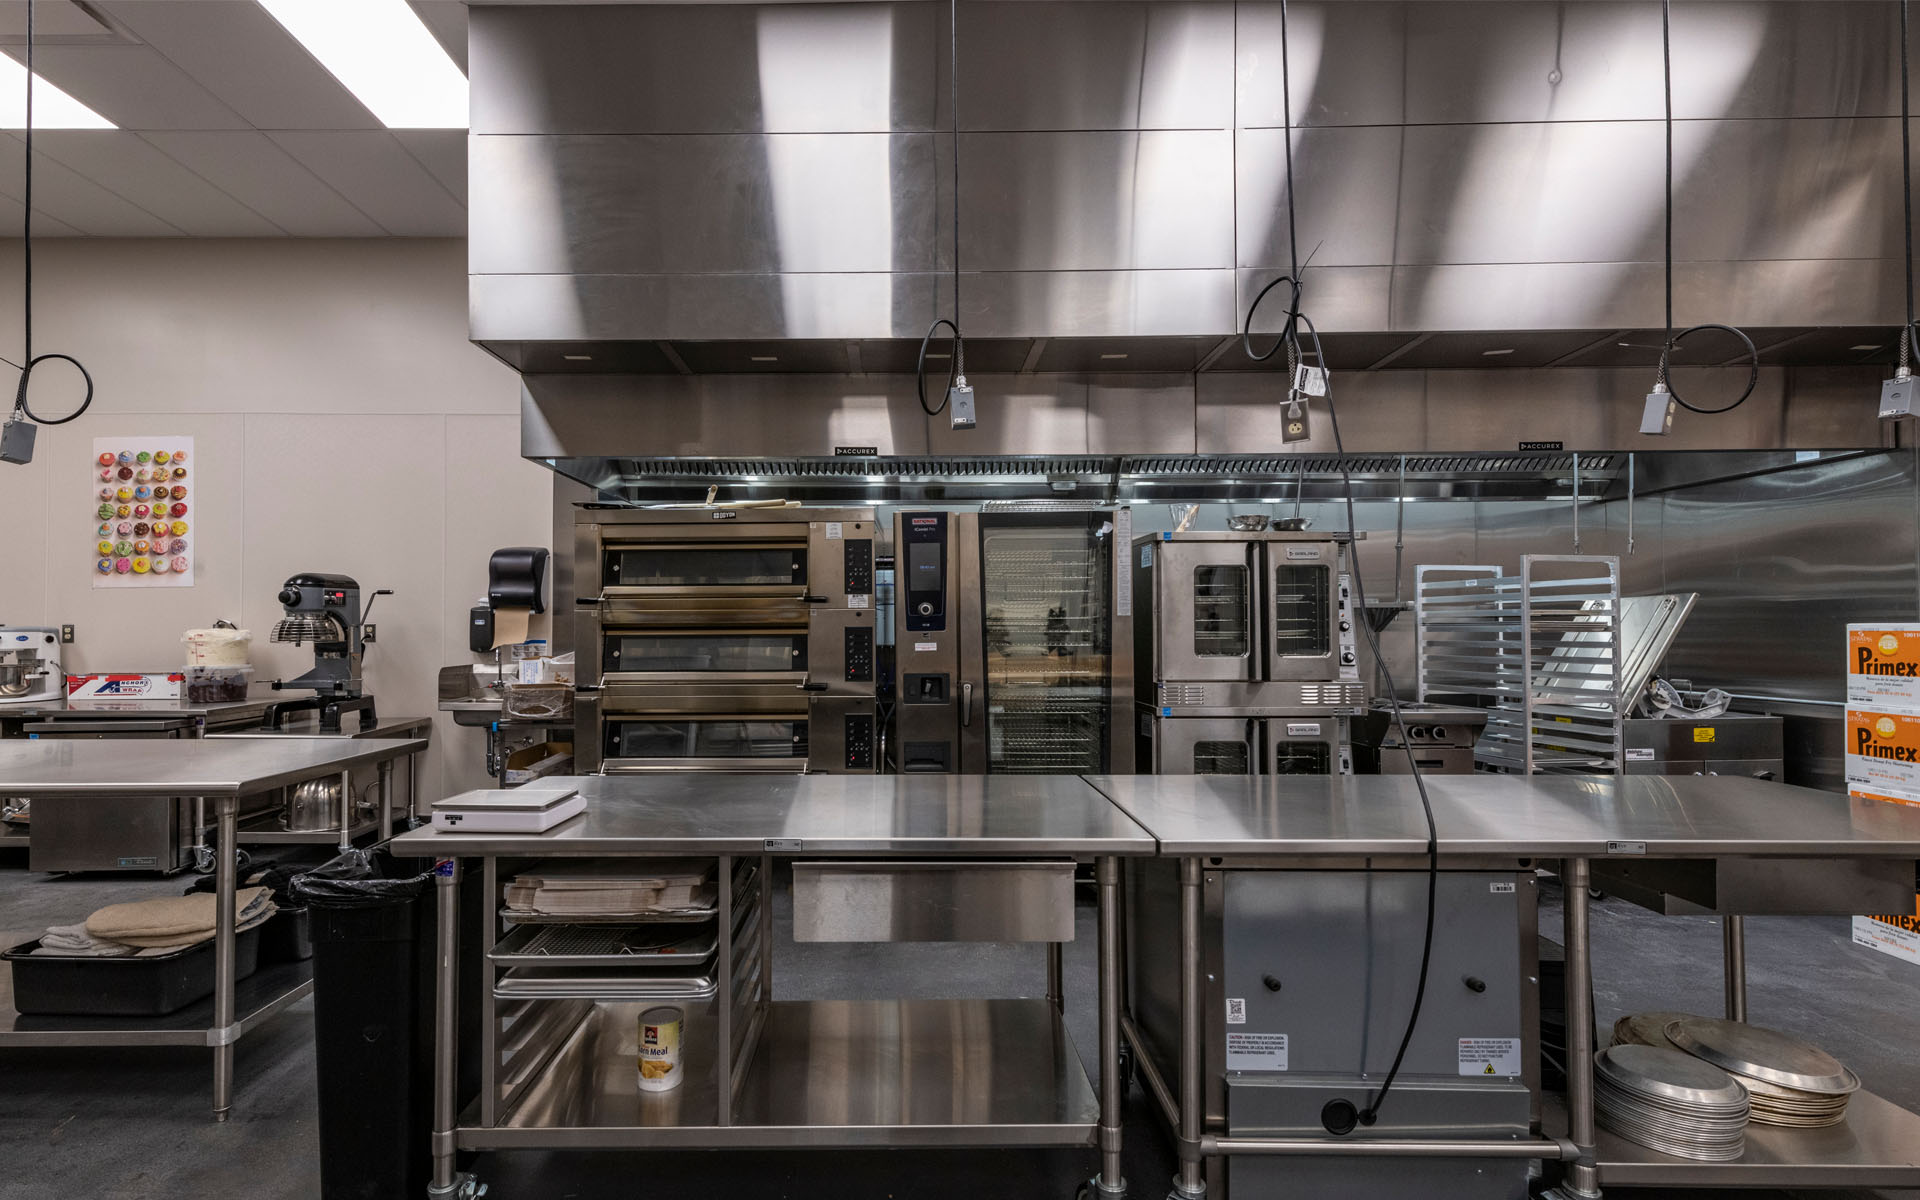 The Executive Grille kitchen